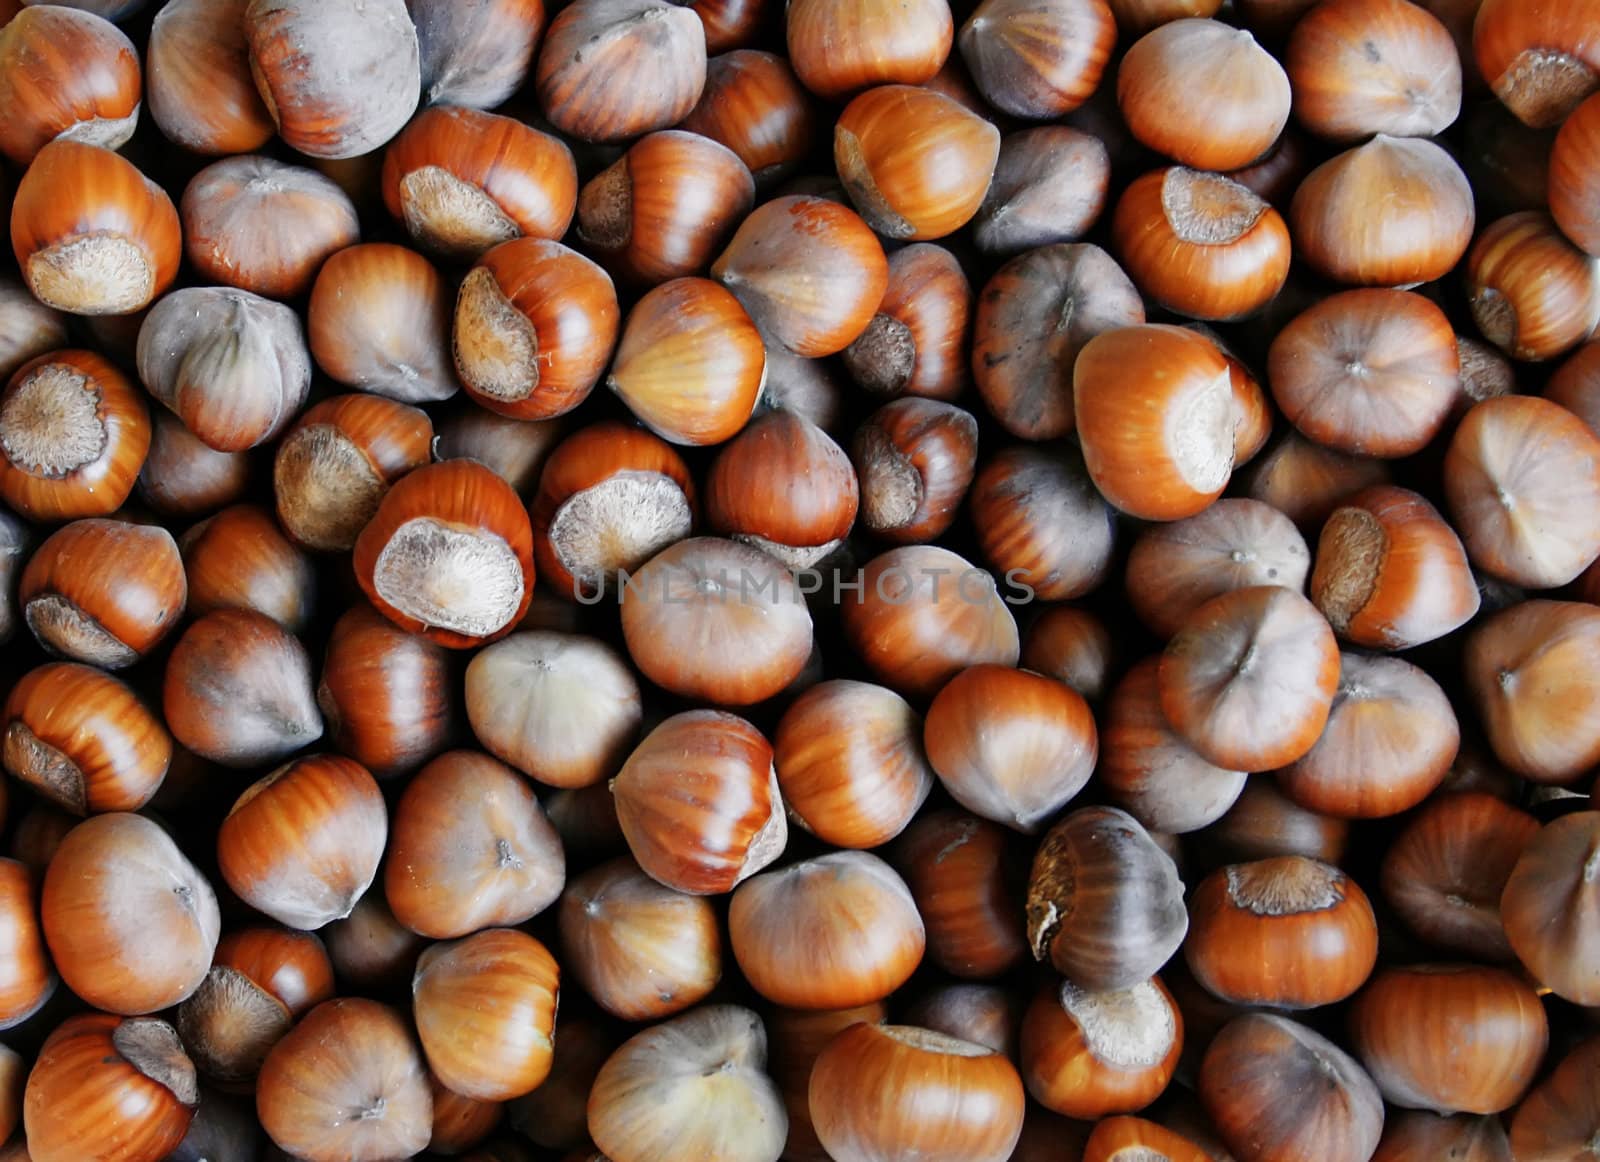 This image shows a macro from many hazelnuts